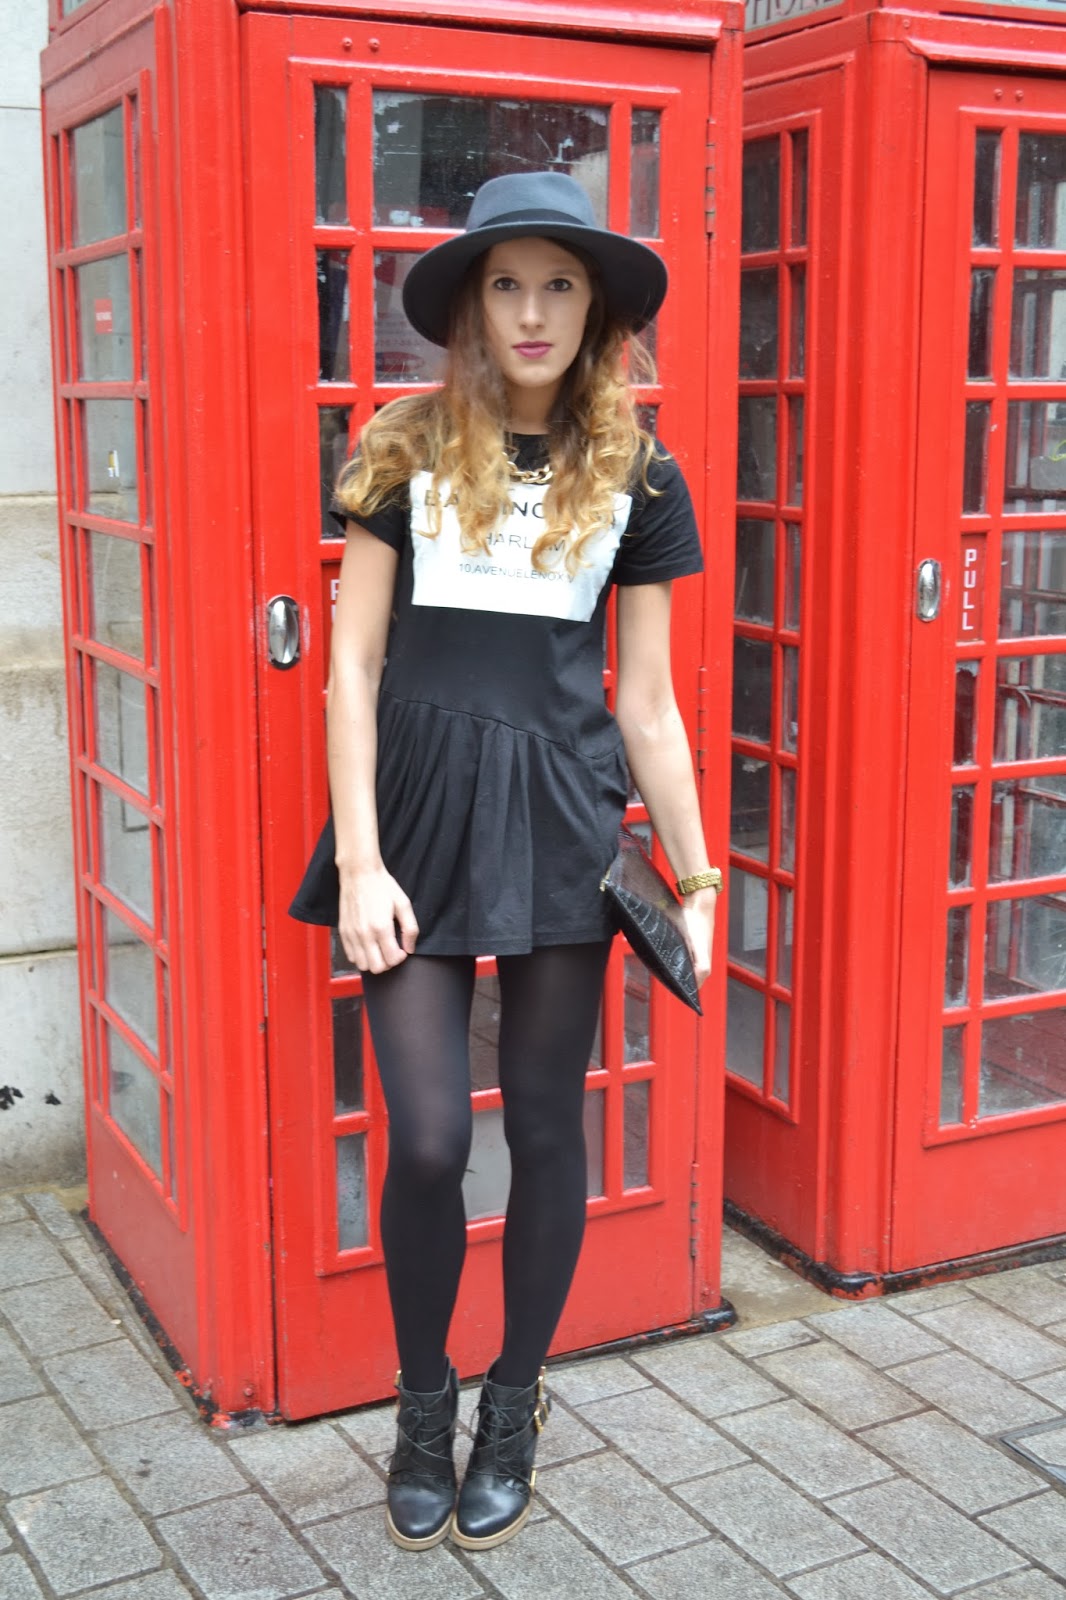 London Calling | What's In Her Wardrobe